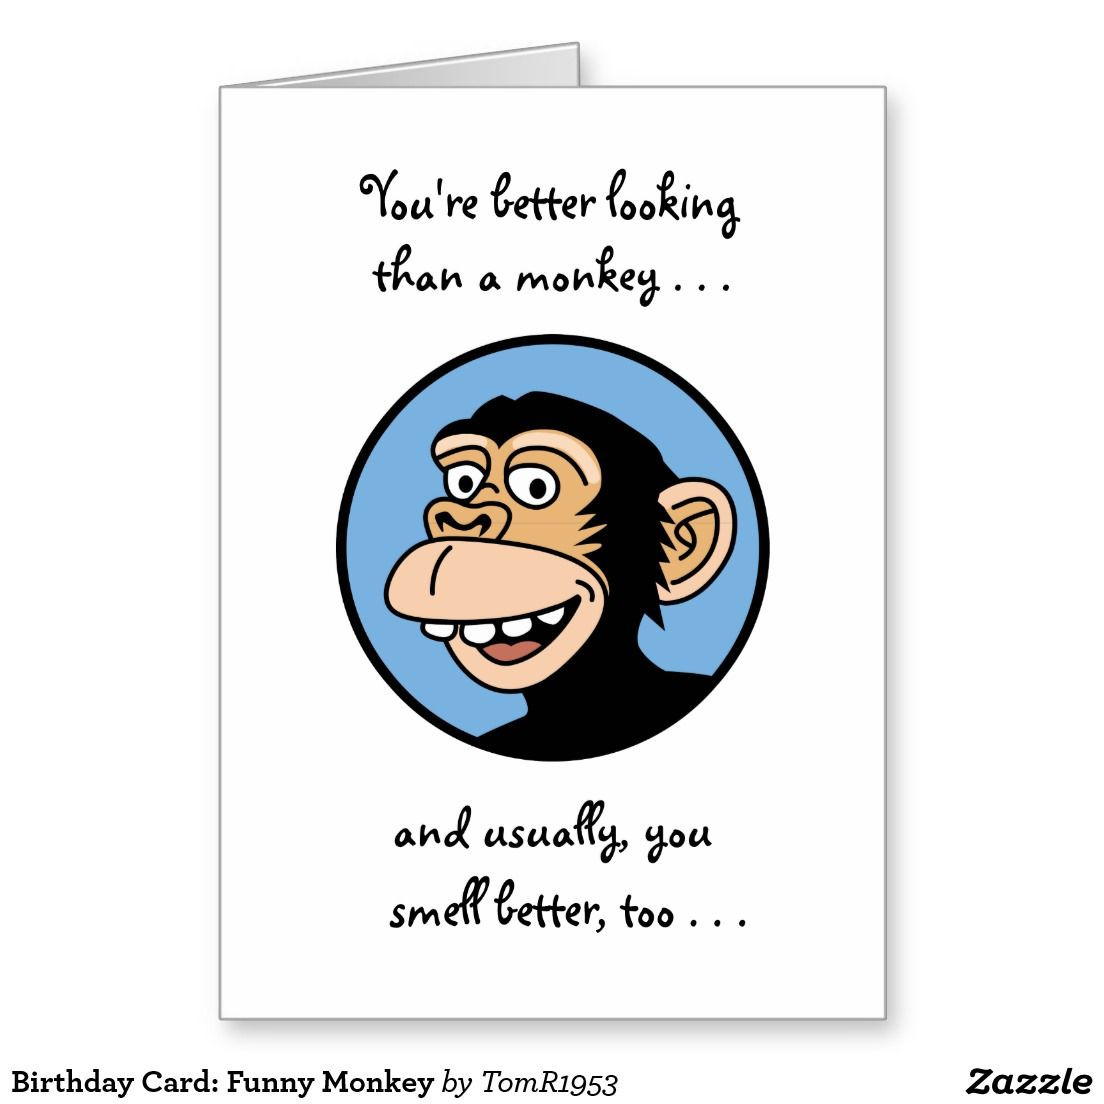 Funny Birthday Card Template
 Funny Birthday Card Template